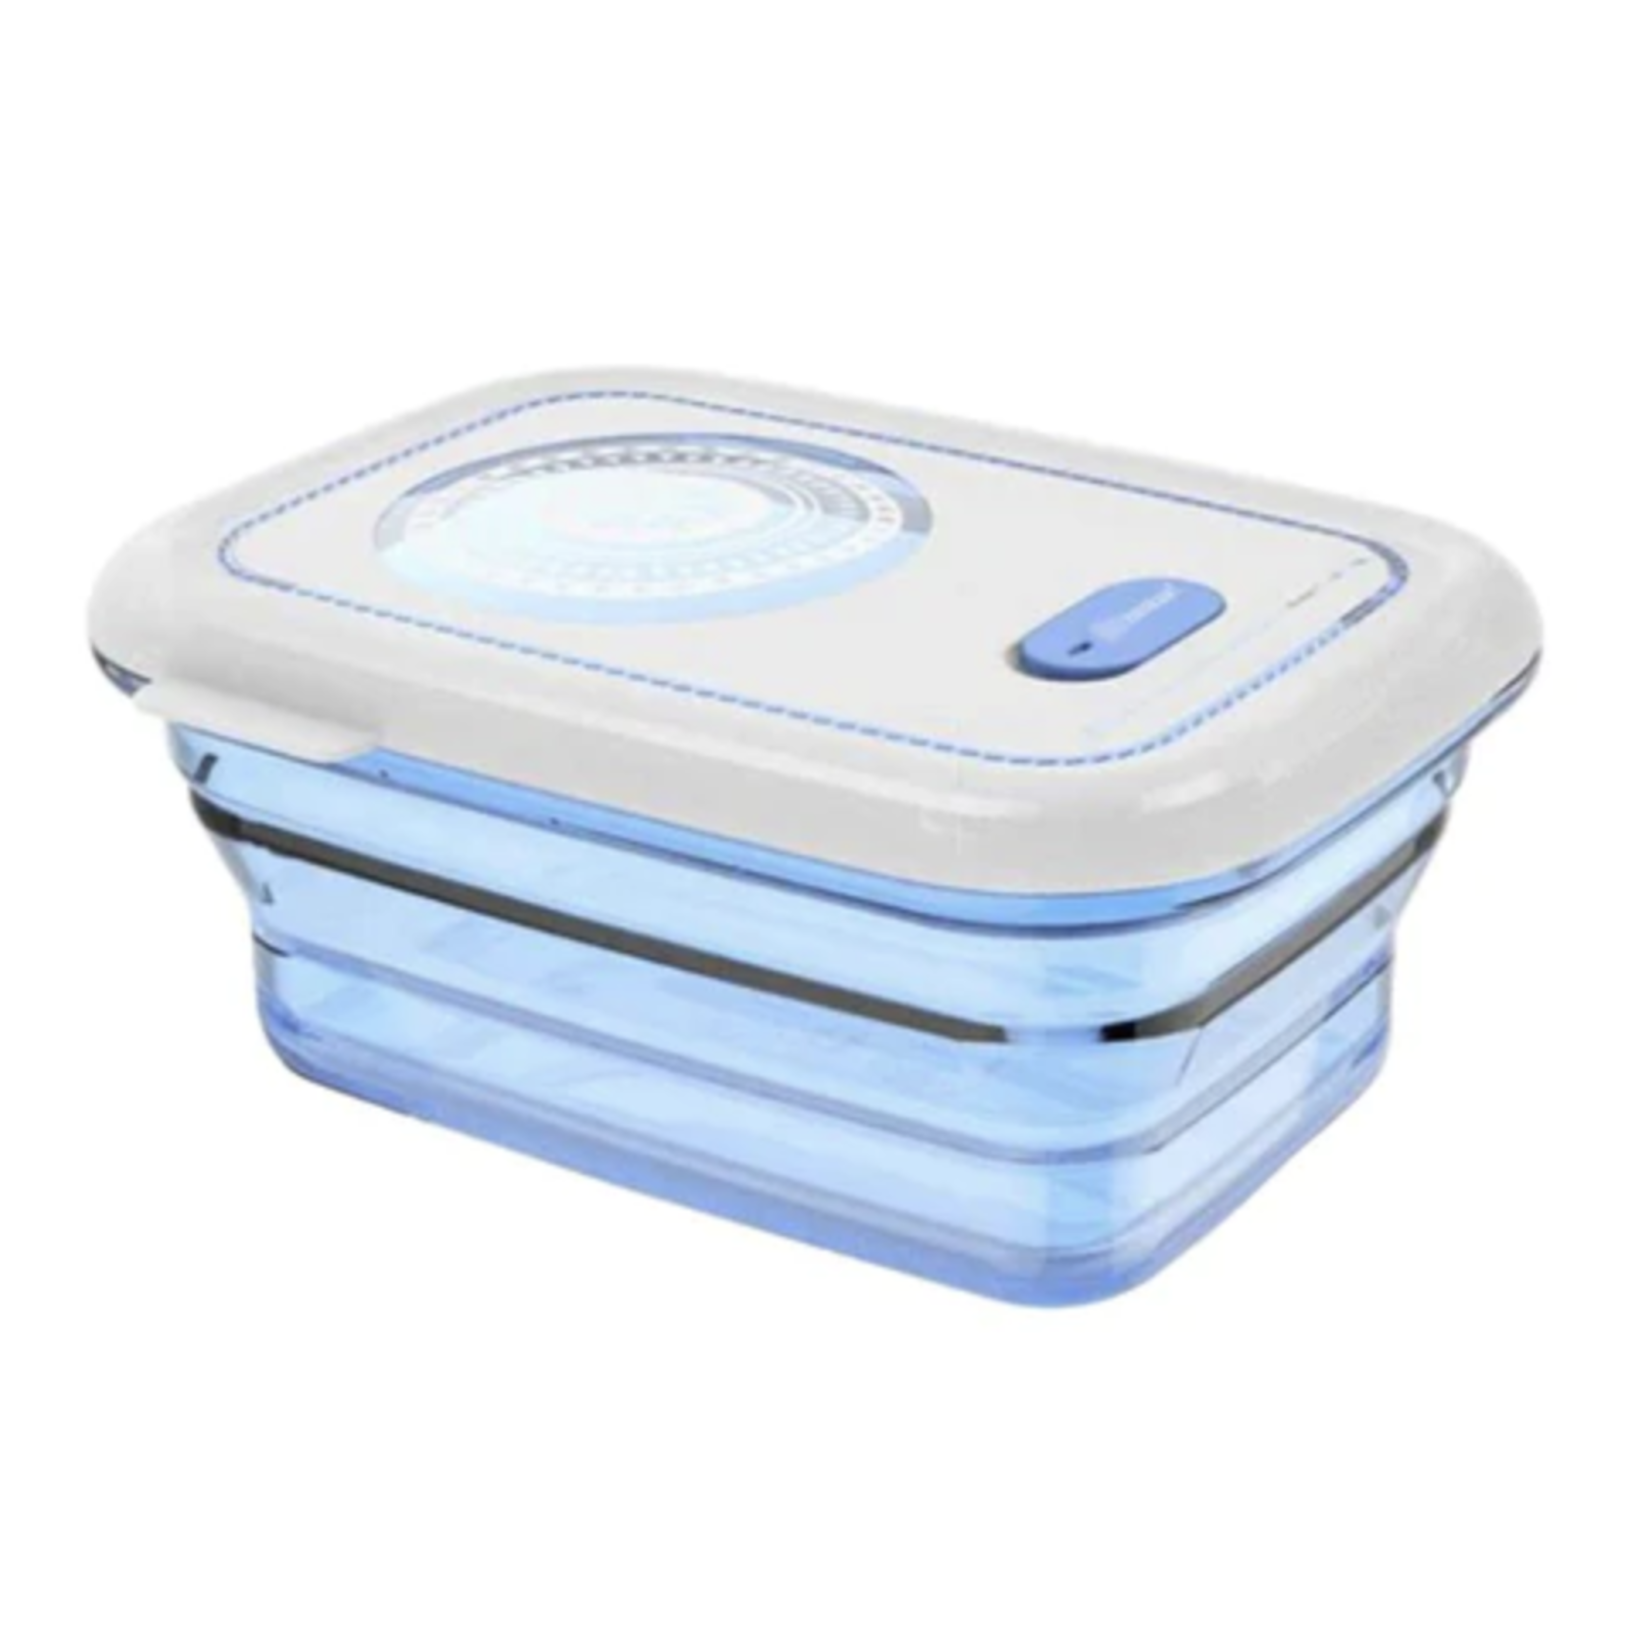 Haakaa Silicone Collapsible Food Storage Container New & Improved Blue 860ml